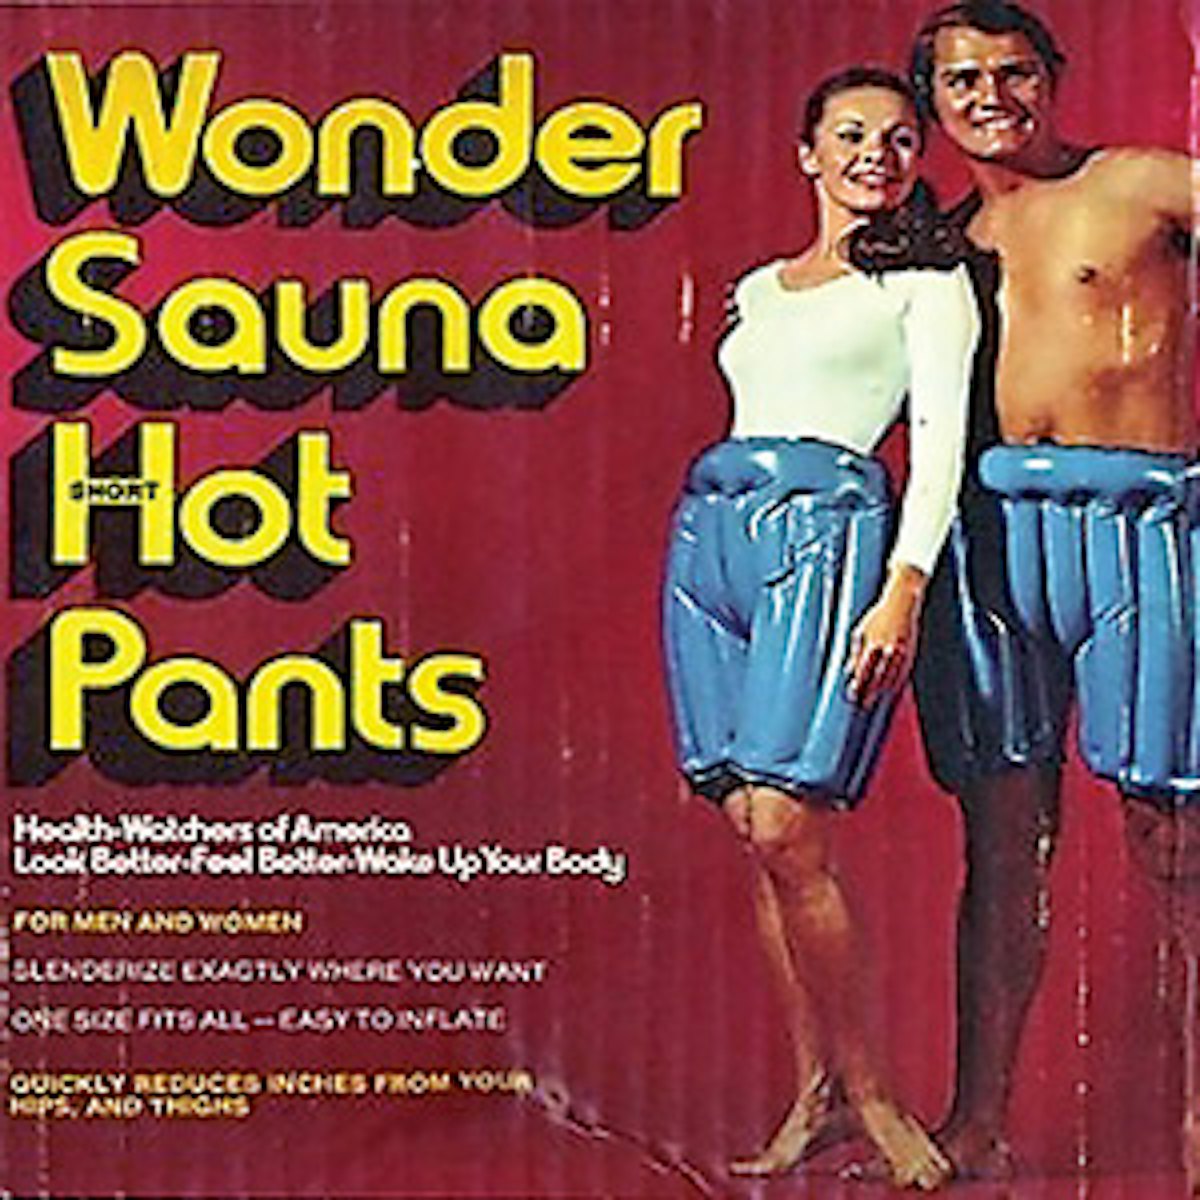 Sauna Pants: They're Real, and They're Spectacular